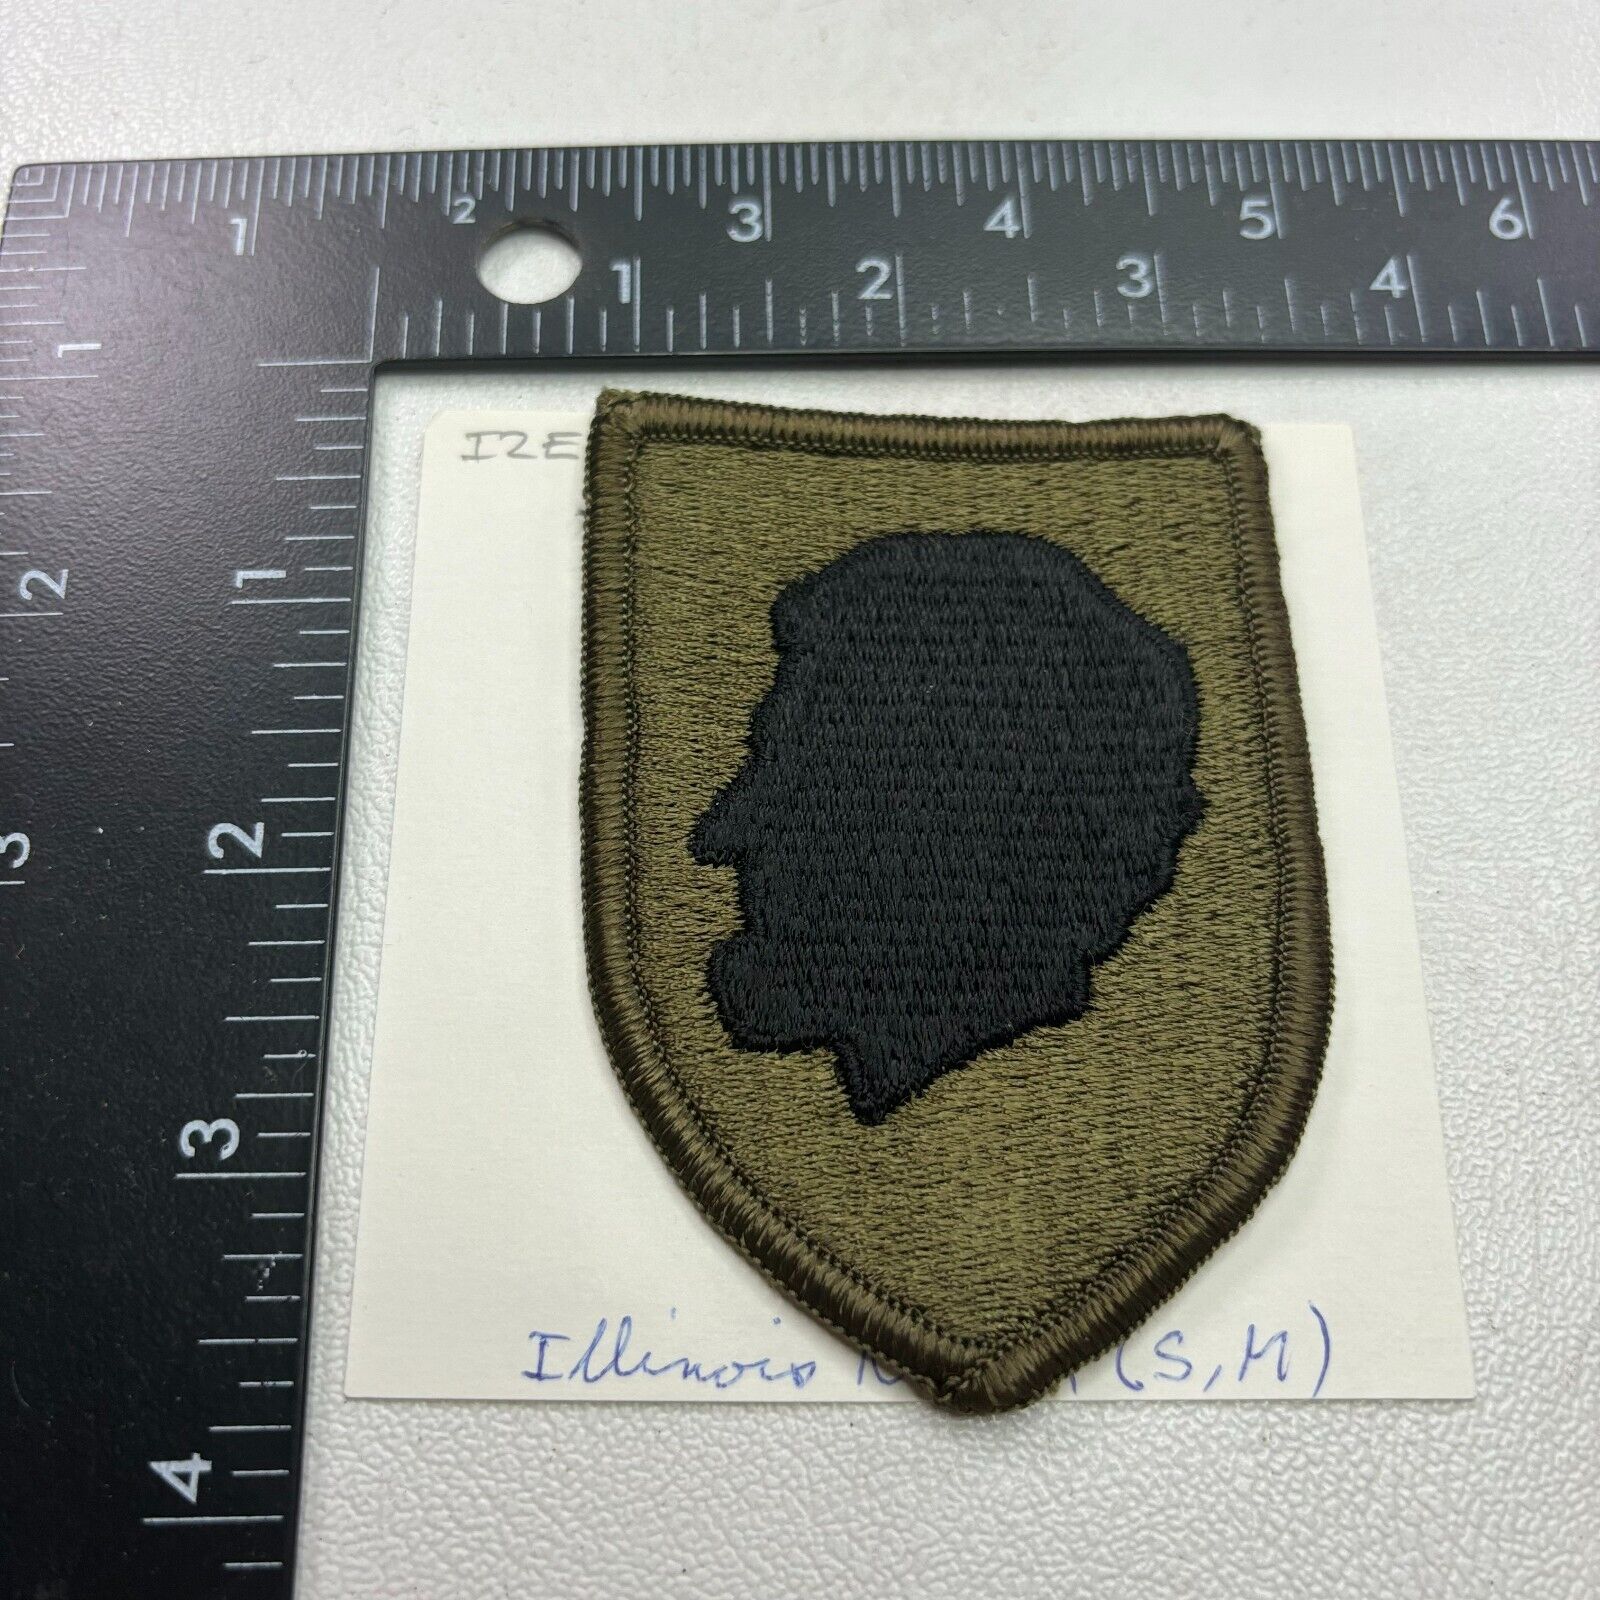 US Army National Guard ILLINOIS SUBDUED MERROWED EDGE Patch NGHQ 301G